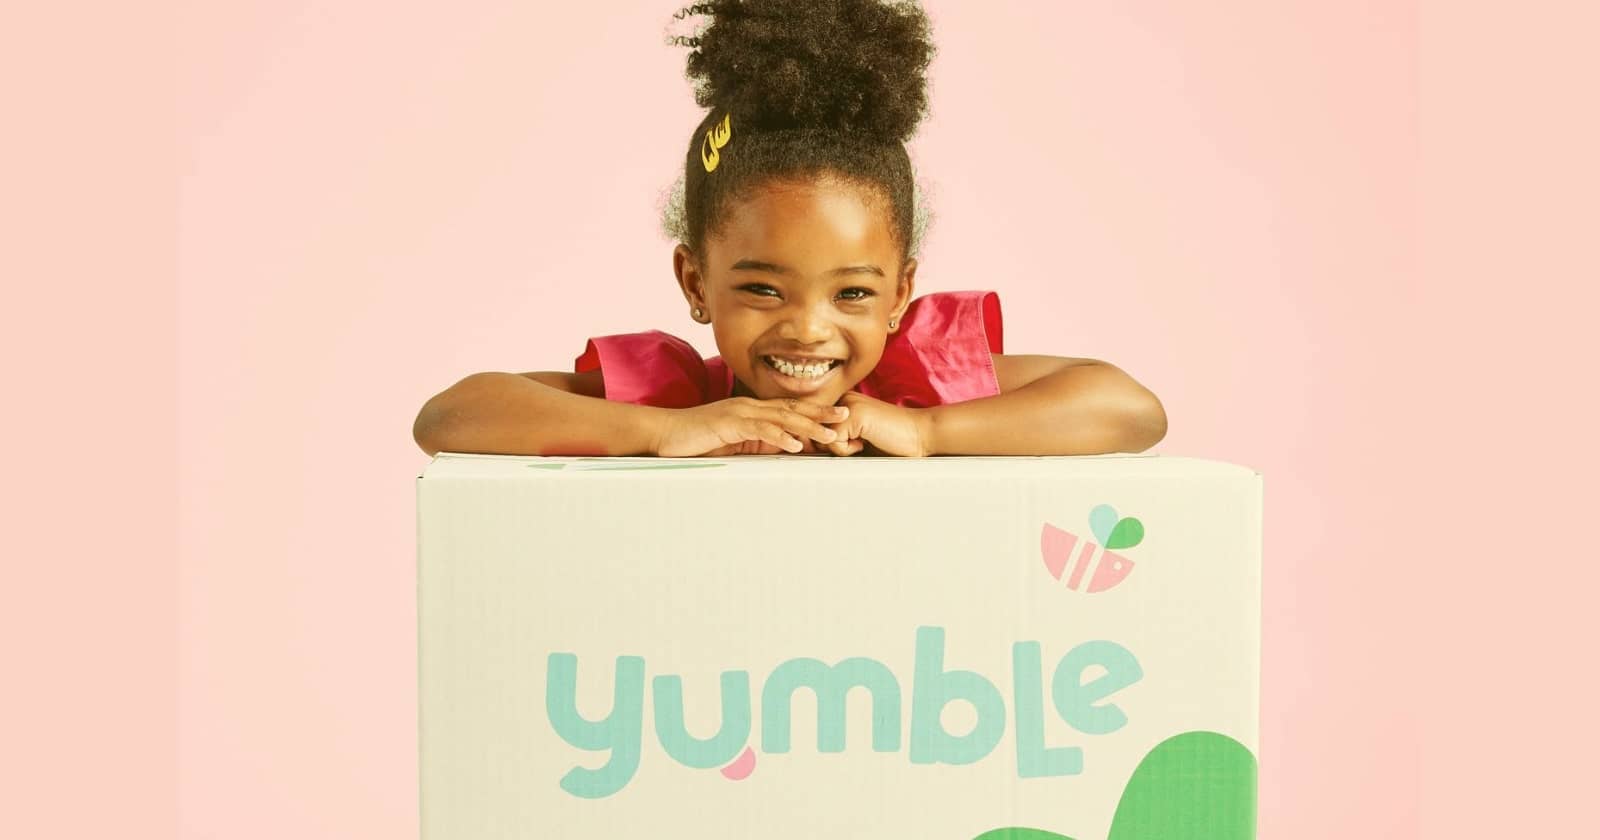 featured image - yumble kids review article